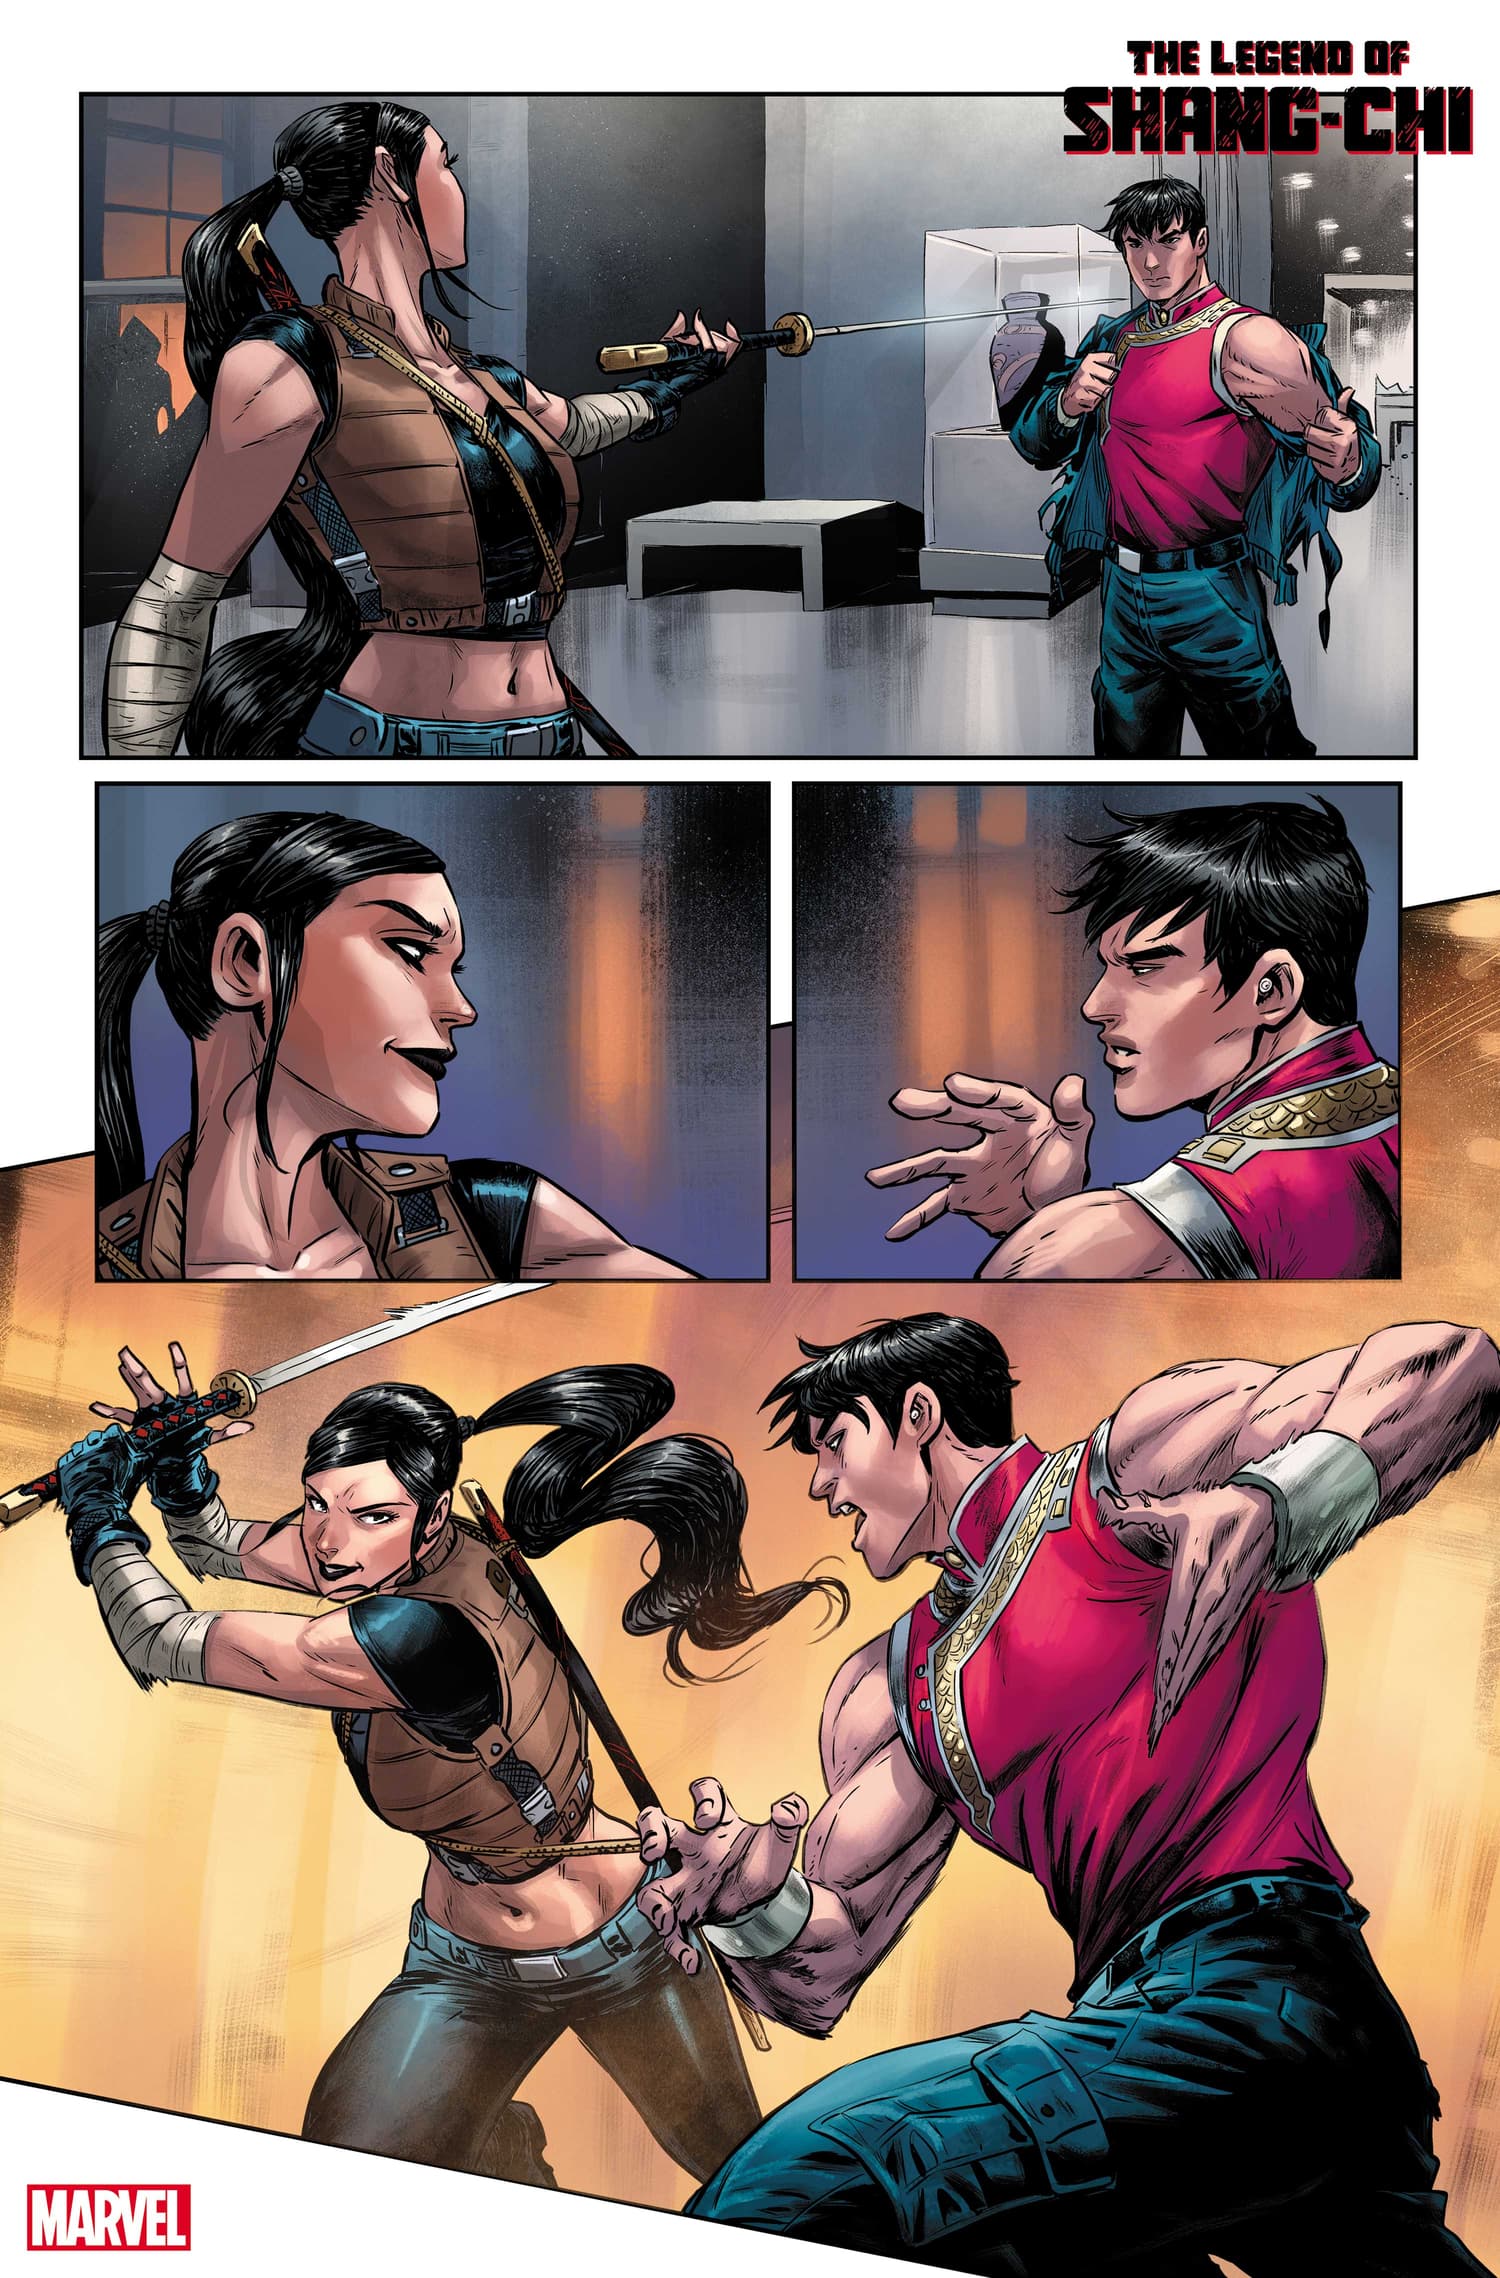 THE LEGEND OF SHANG-CHI #1 art by Andie Tong with colors by Rachelle Rosenberg